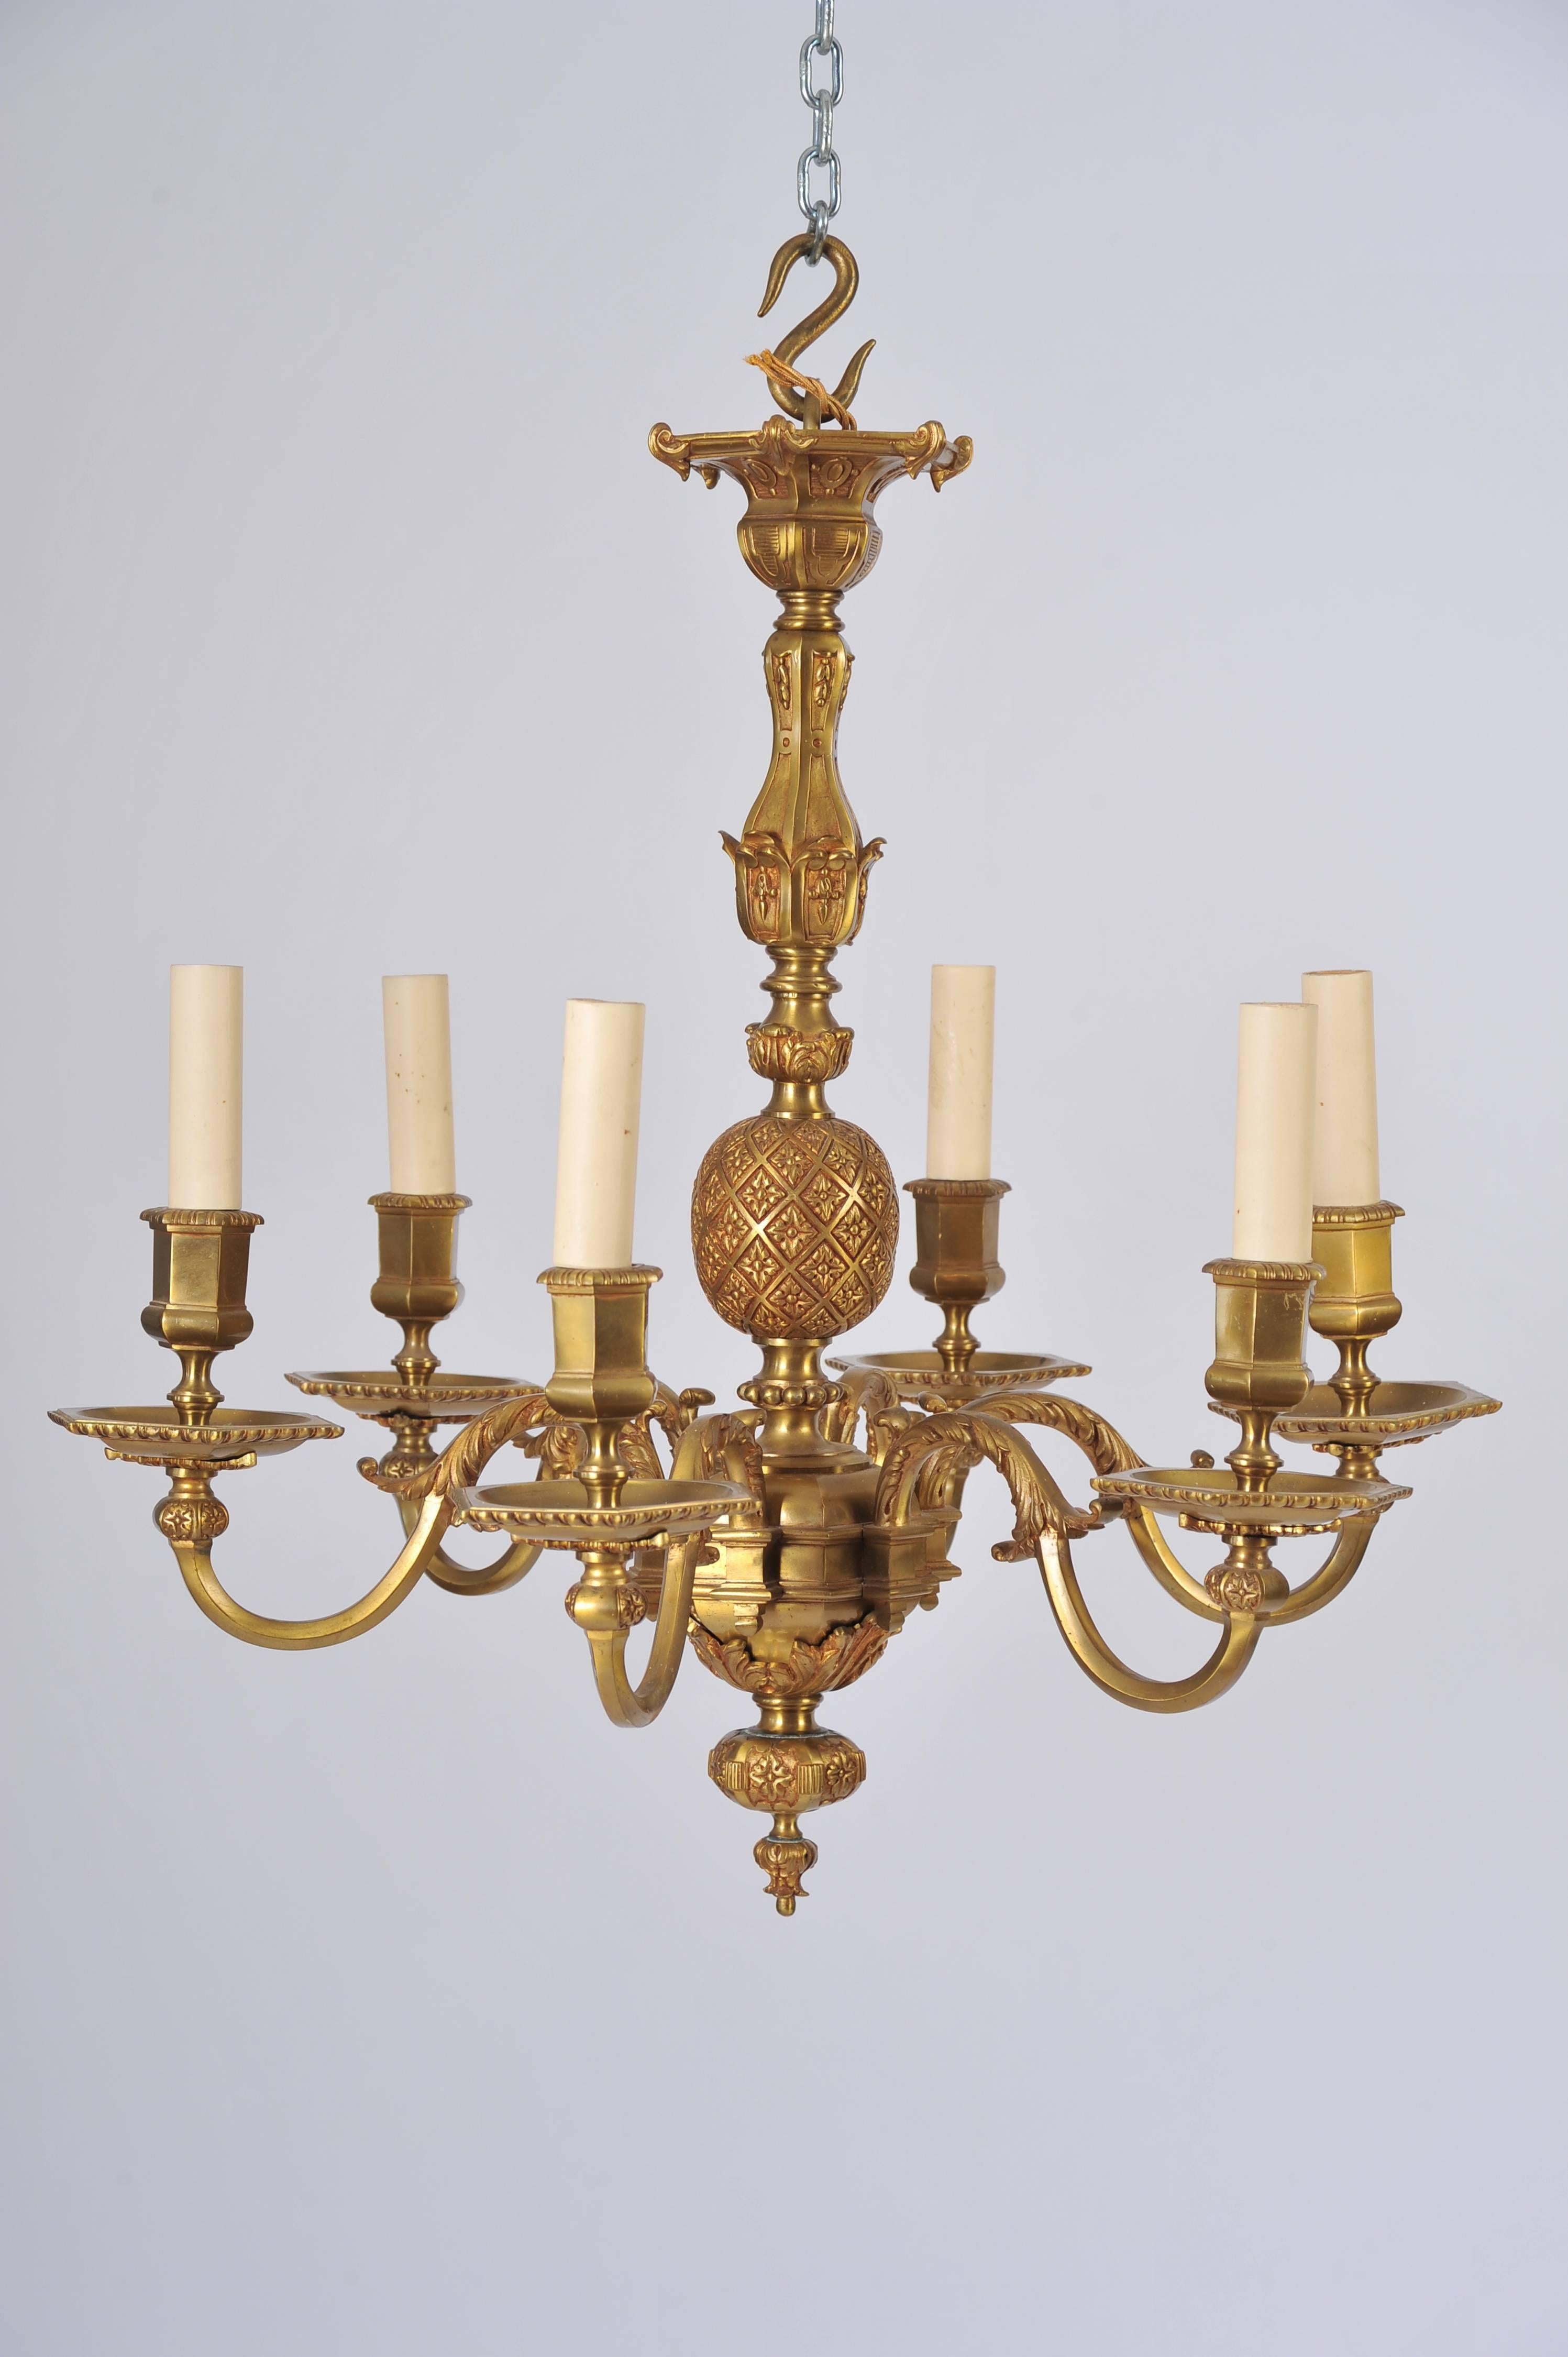 This wonderful pair of ormolu chandeliers is Flemish in design, and feature a six arm configuration. Each light measures 25 in – 63.5 cm in diameter and 25 in – 63.5 cm in height. The central column has a Fabergé styled ‘egg’ decoration and